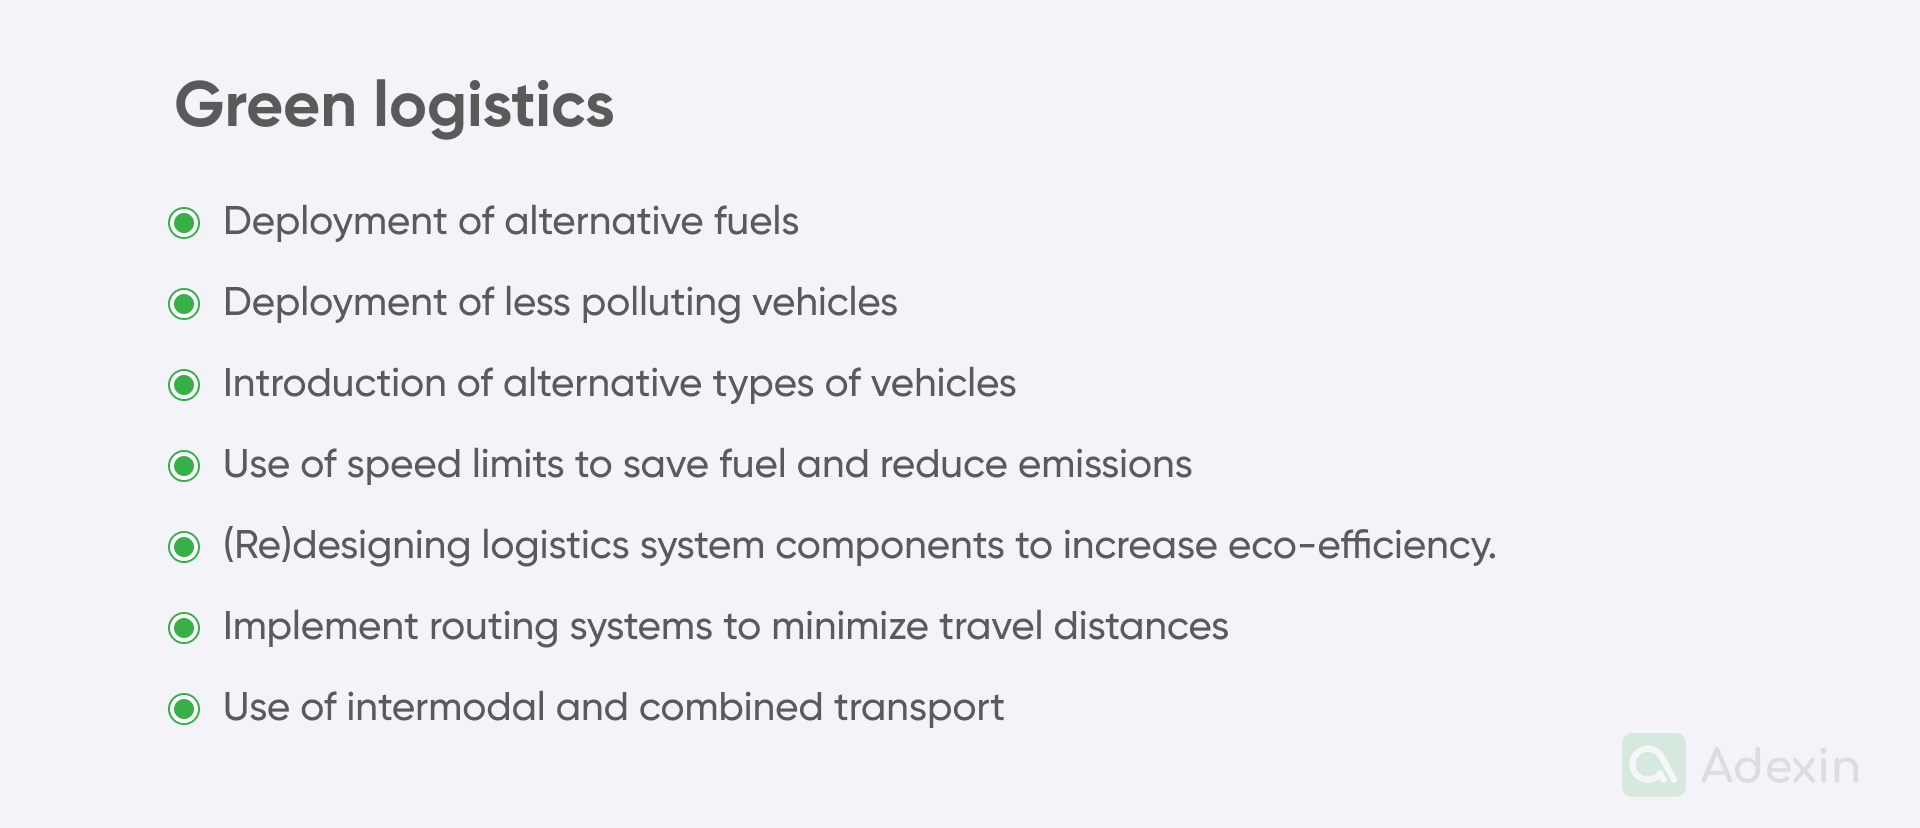 Areas for green logistics